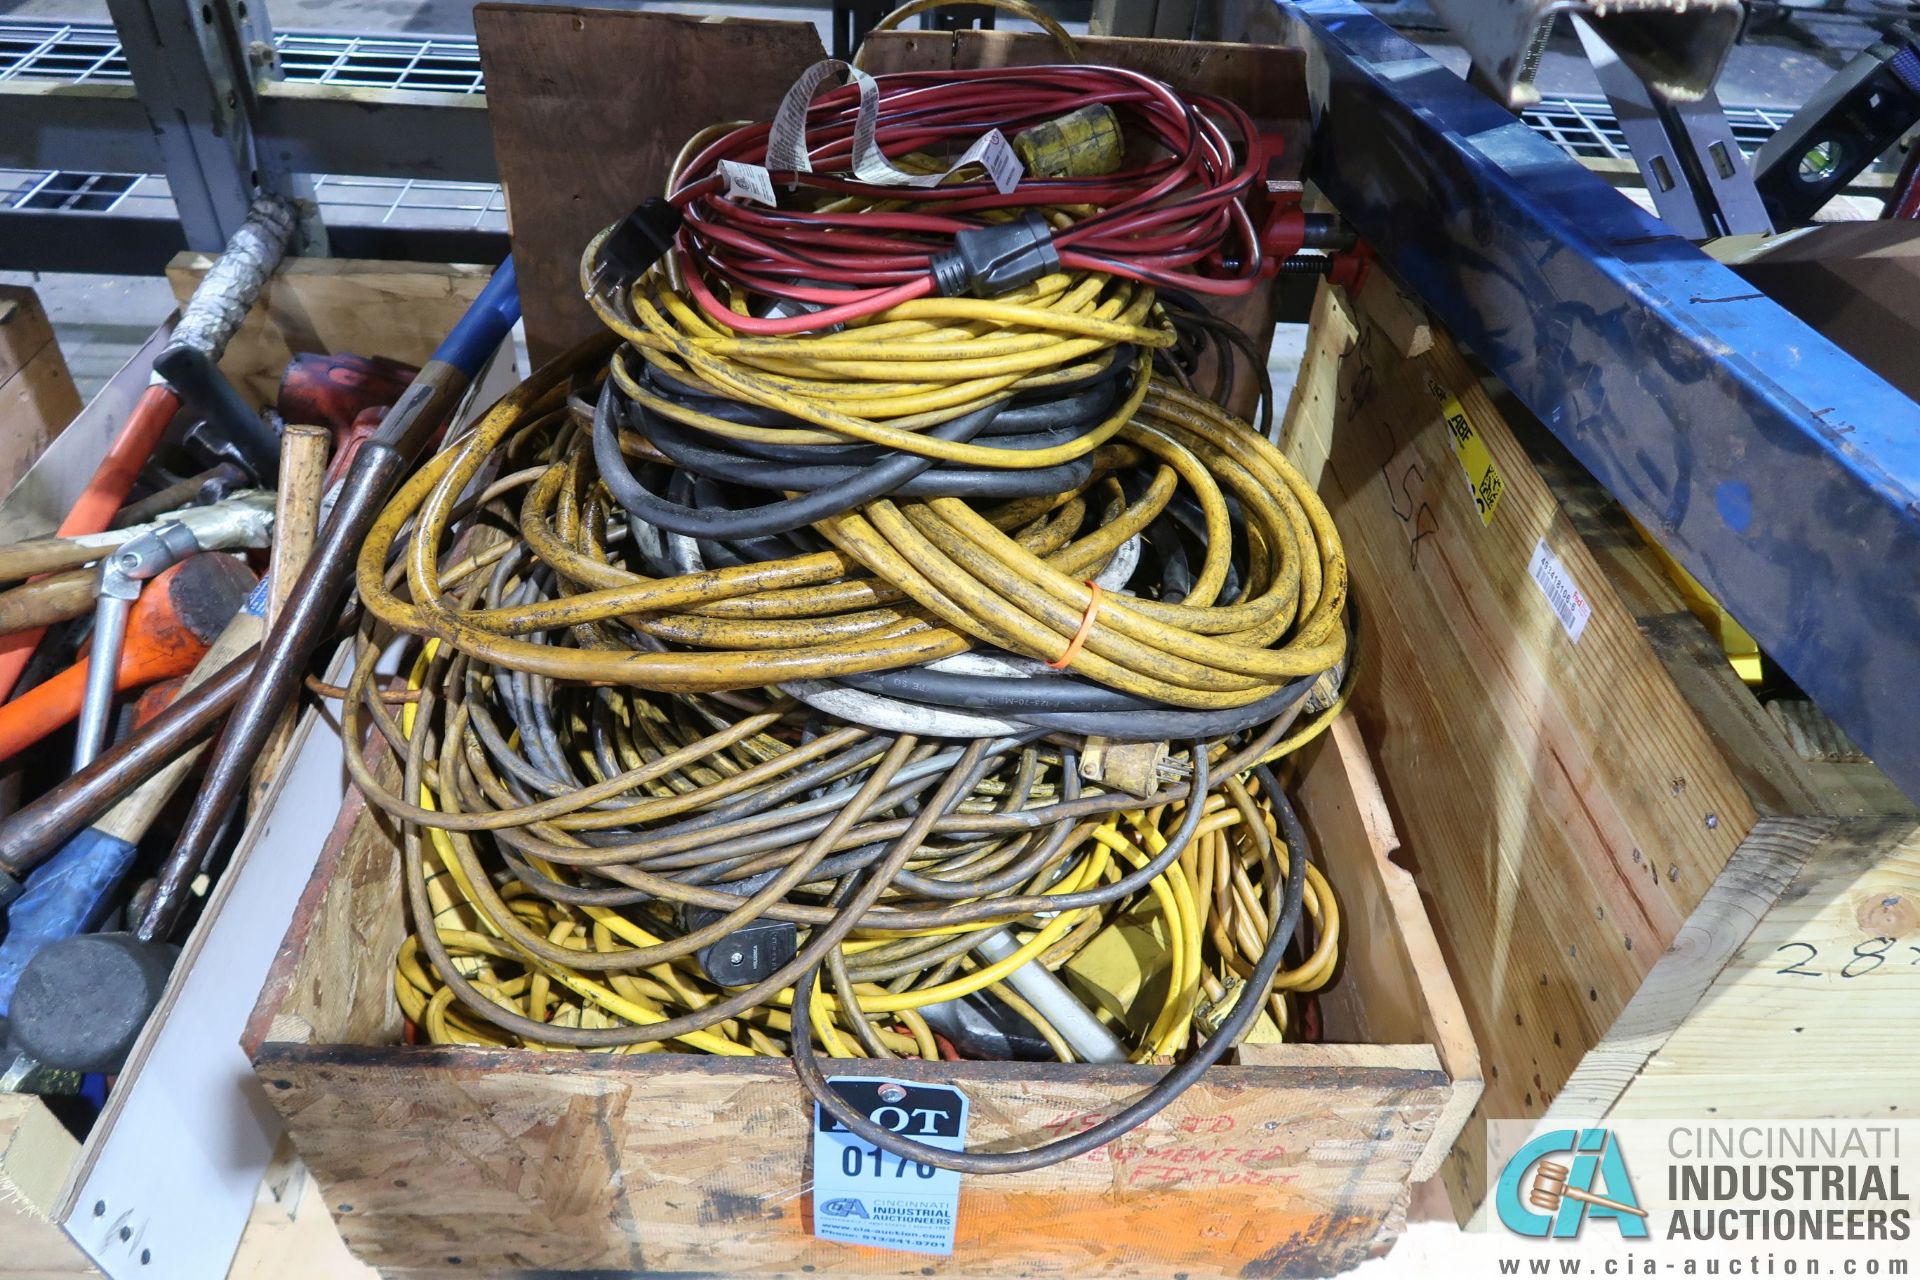 WOOD CRATE ELECTRIC CORDS